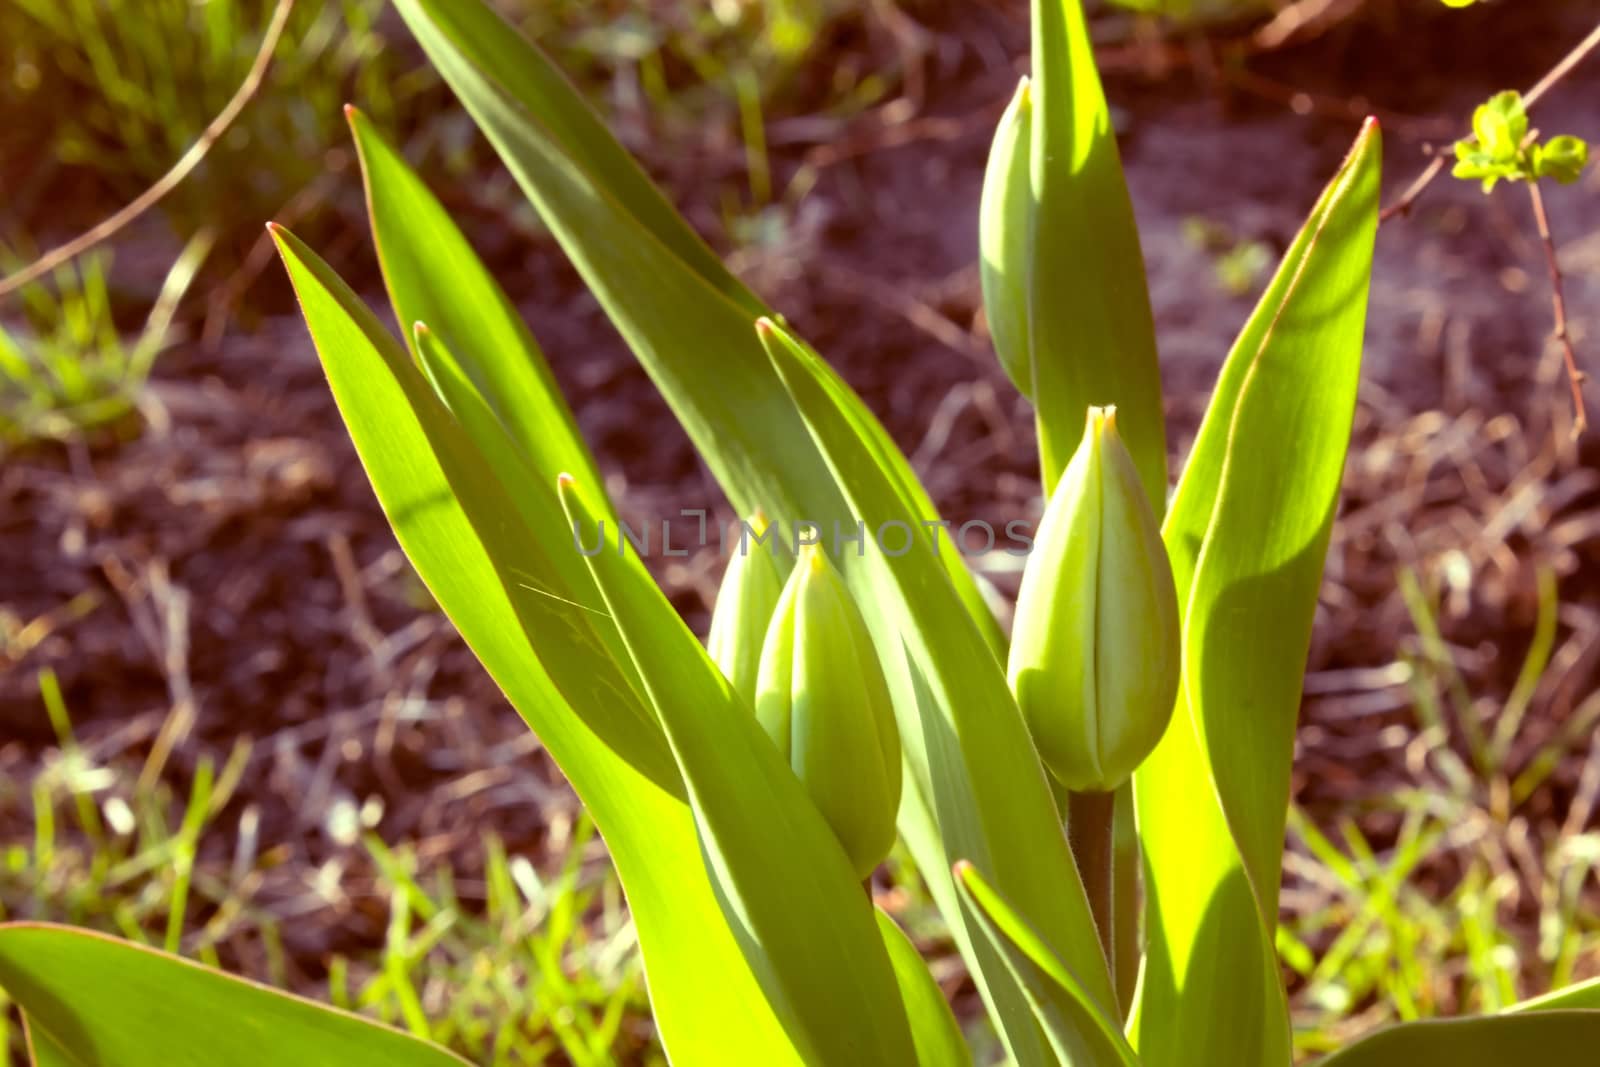 Tulips in the bud in the flowerbed leaves